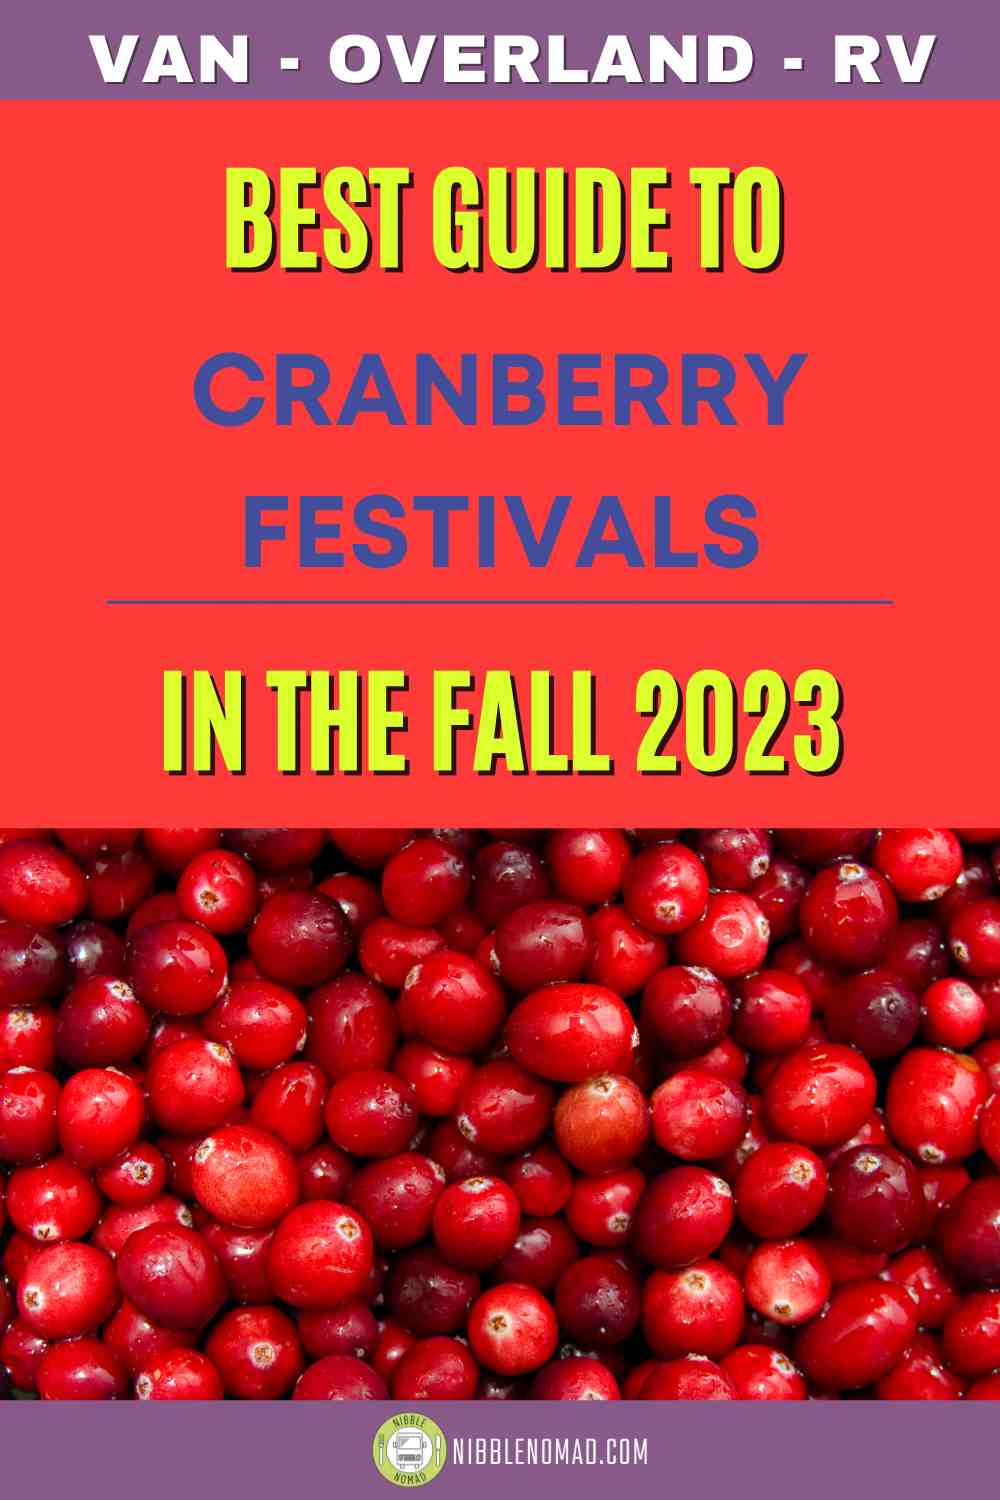 Pinterest card for cranberries